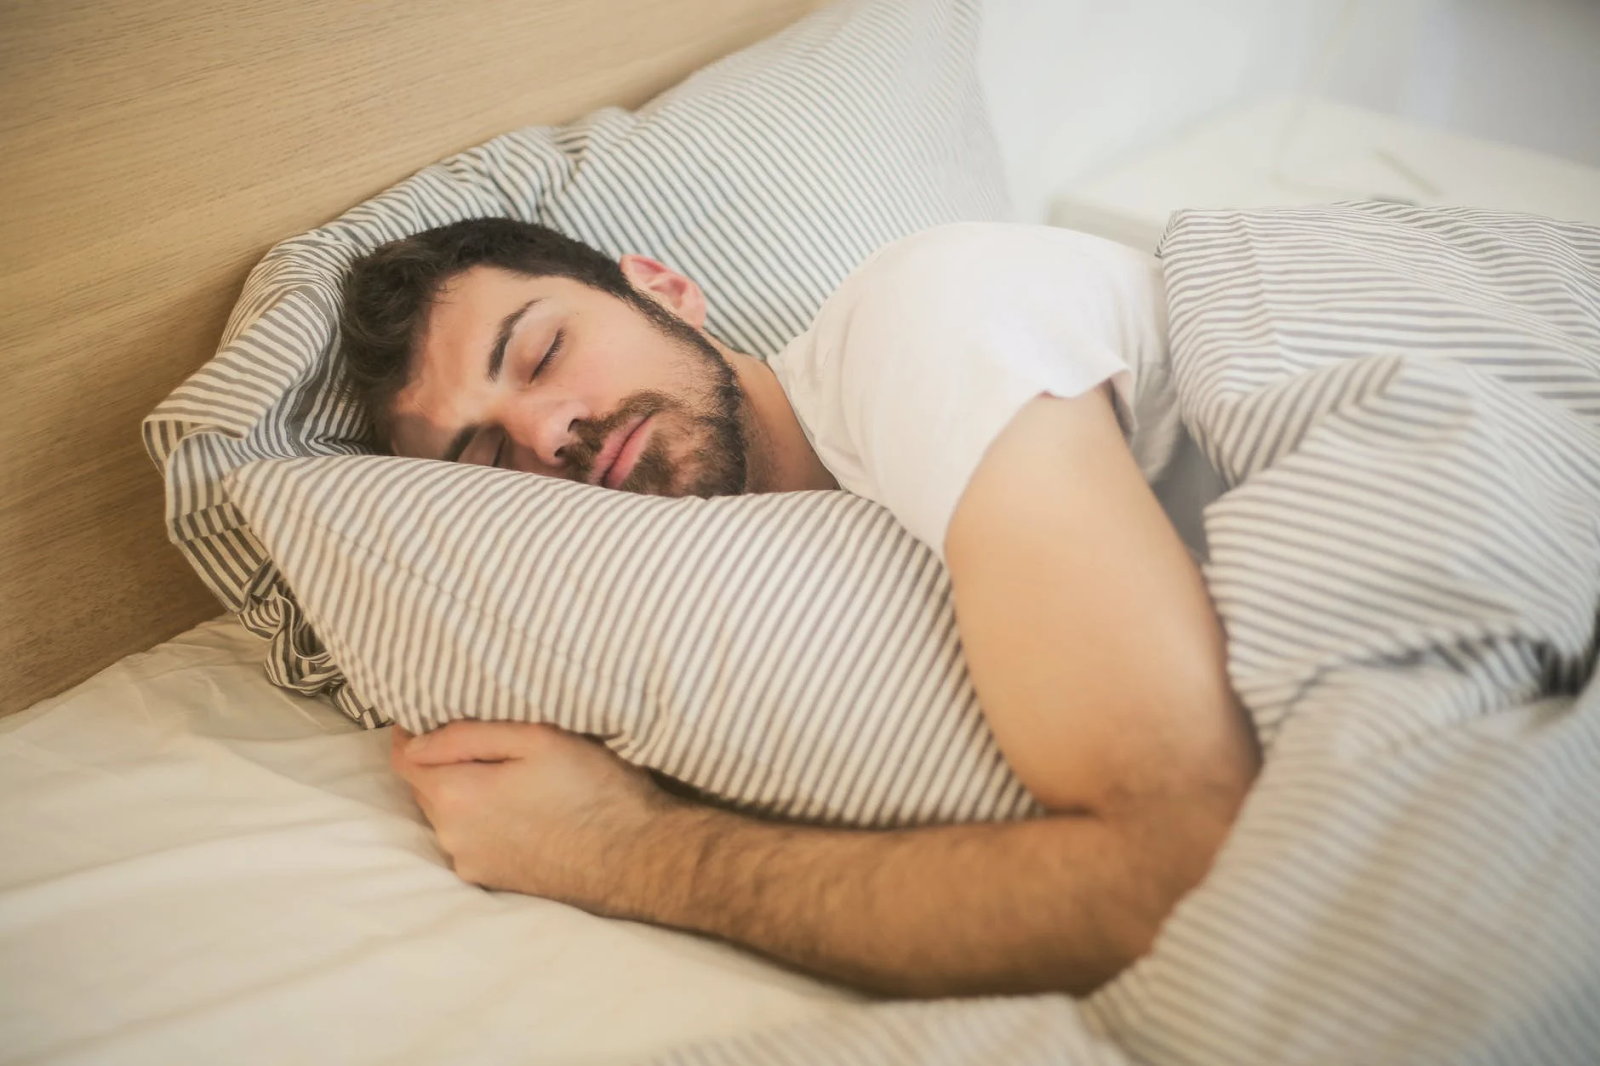 A man sleeps soundly in bed while hugging a pillow